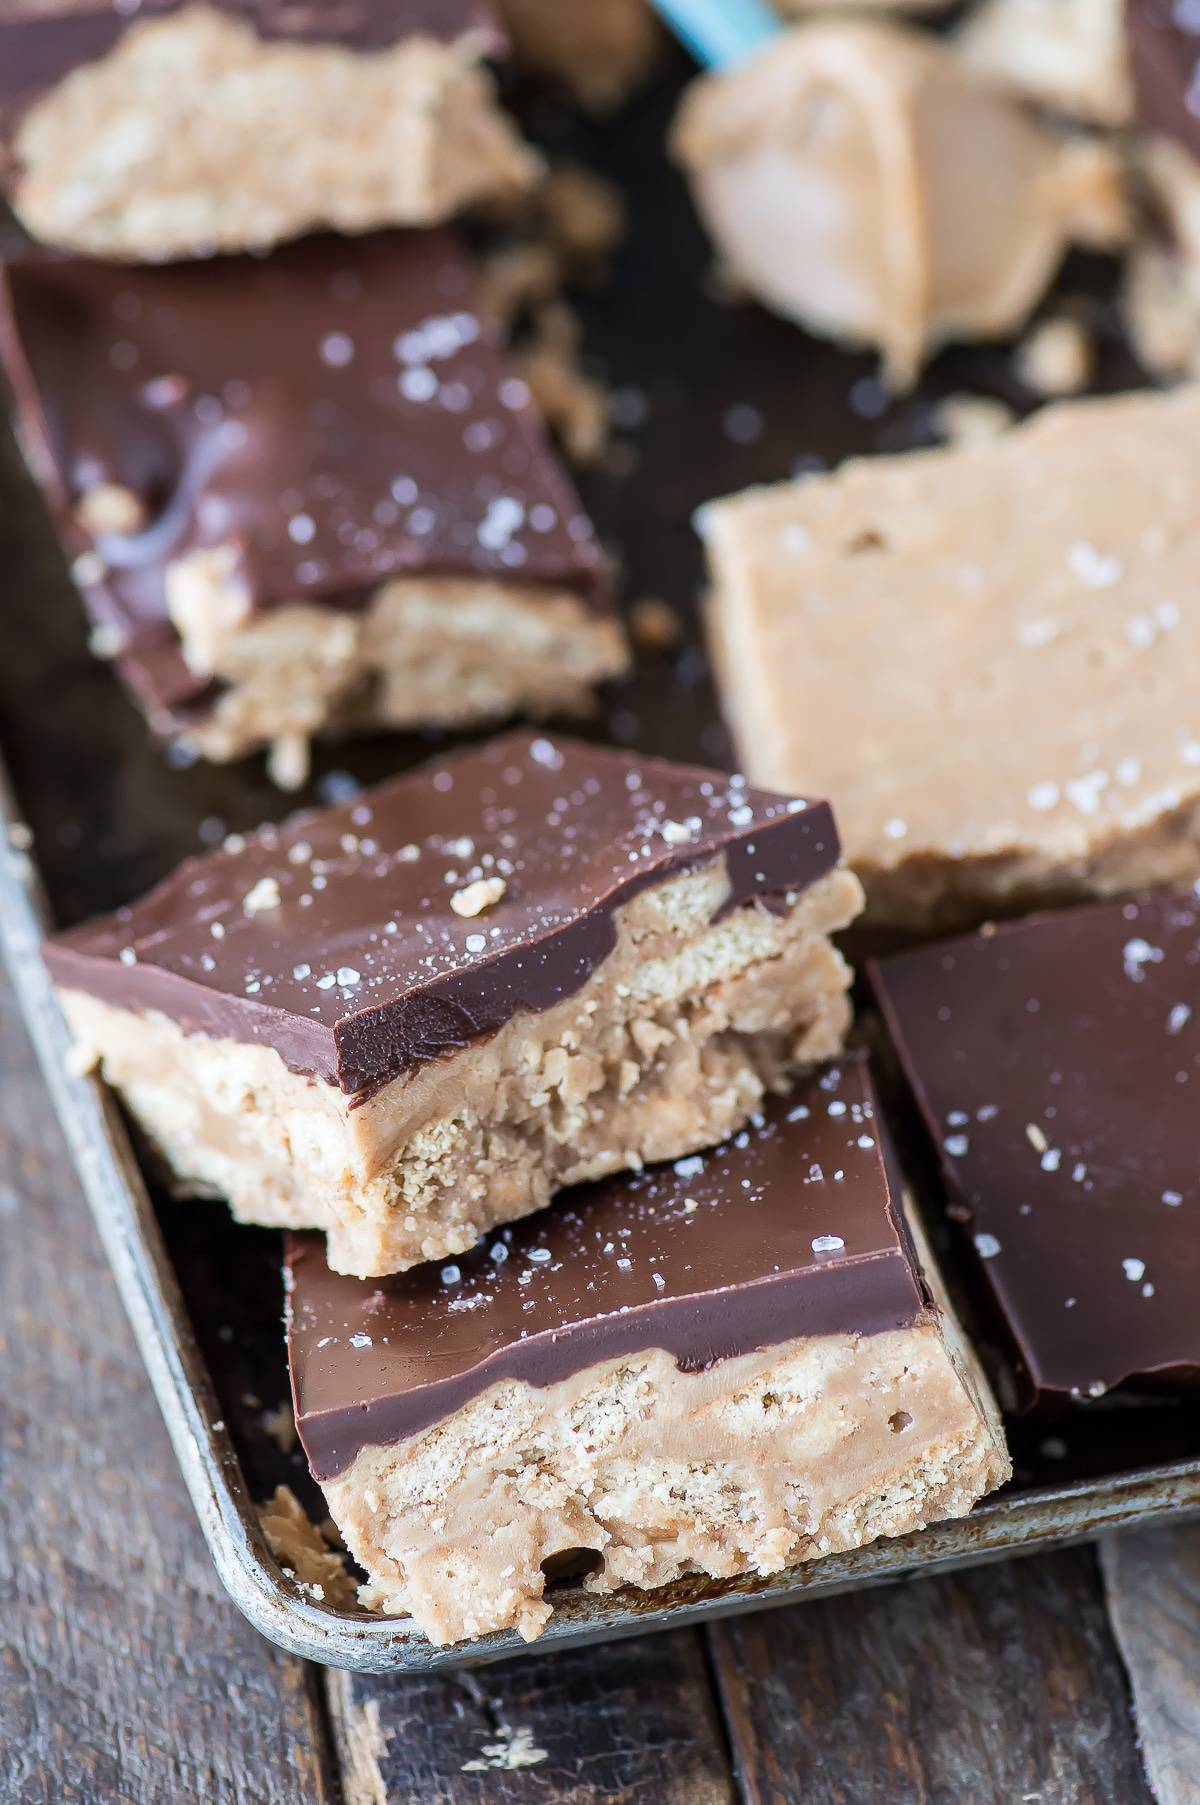 No Bake Crunchy Chocolate Peanut Butter Bars | The First Year